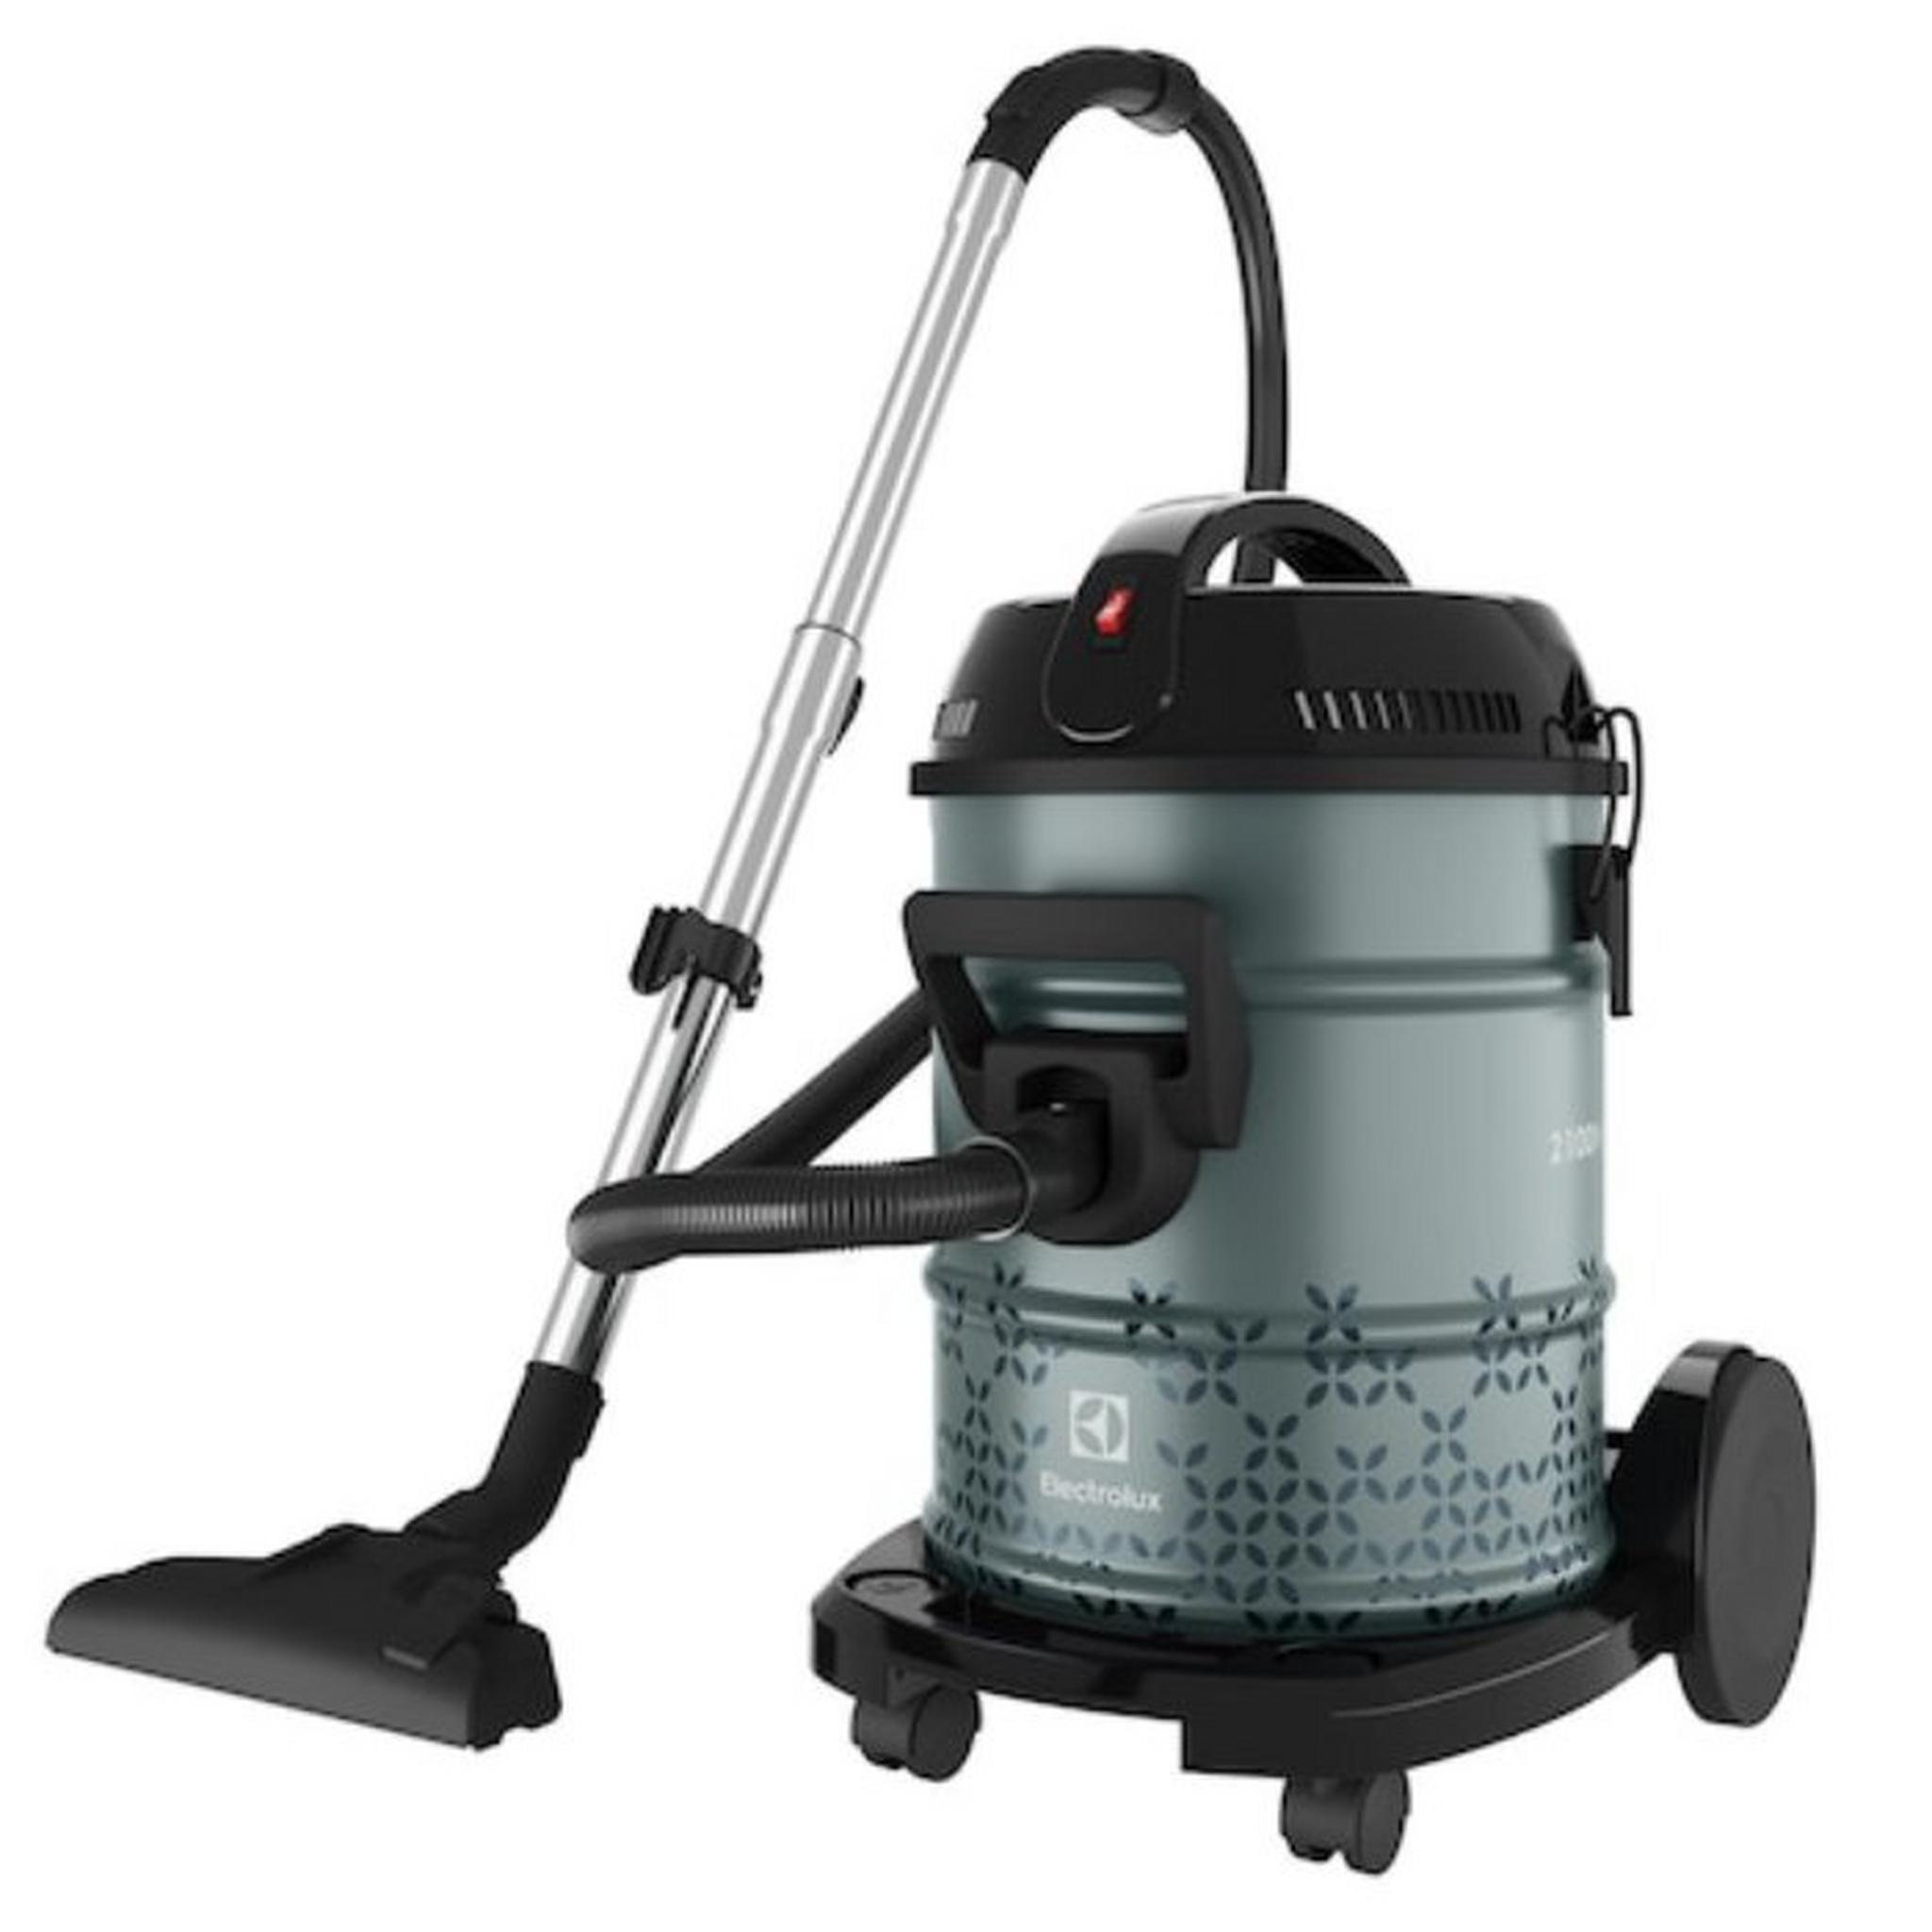 Electrolux UltimateHome 500 Dry Drum Vacuum Cleaner, 2100W, 21L, EFW51612 - Green